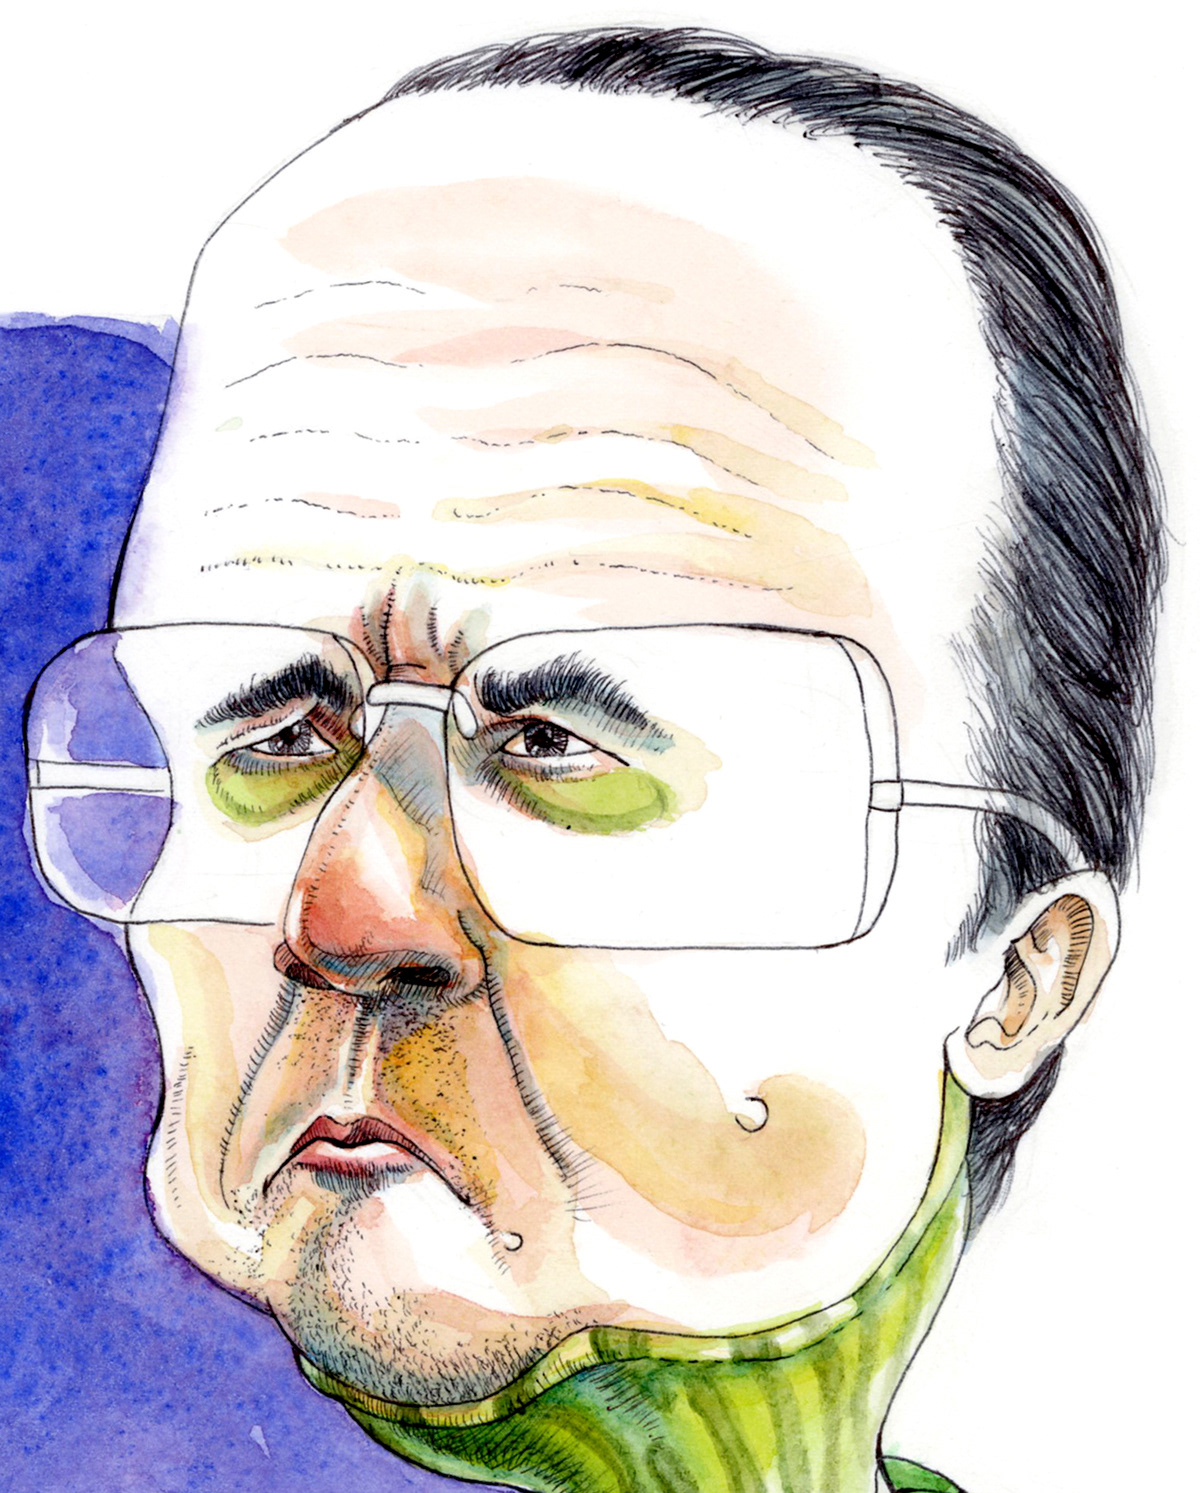 French Anthropomorphism francois hollande Turtle france caricature   watercolor pen microphone shape sarcastic